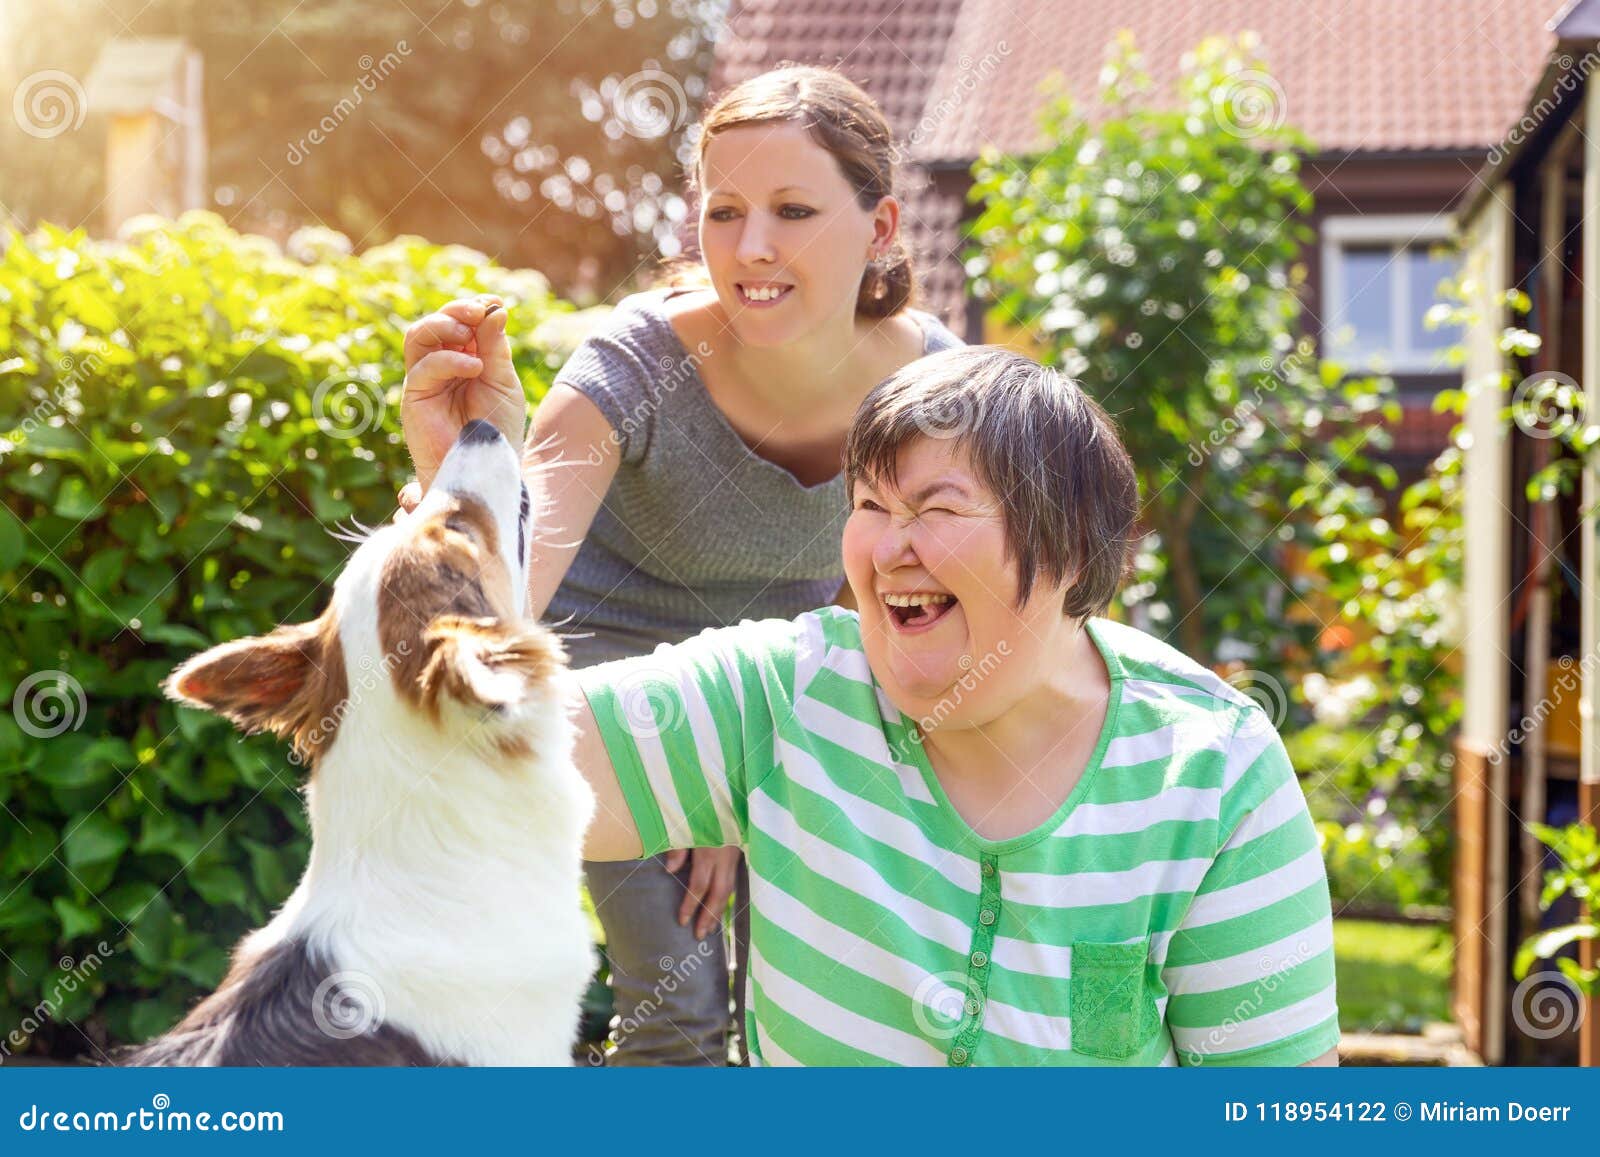 mentally disabled woman with a second woman and a companion dog